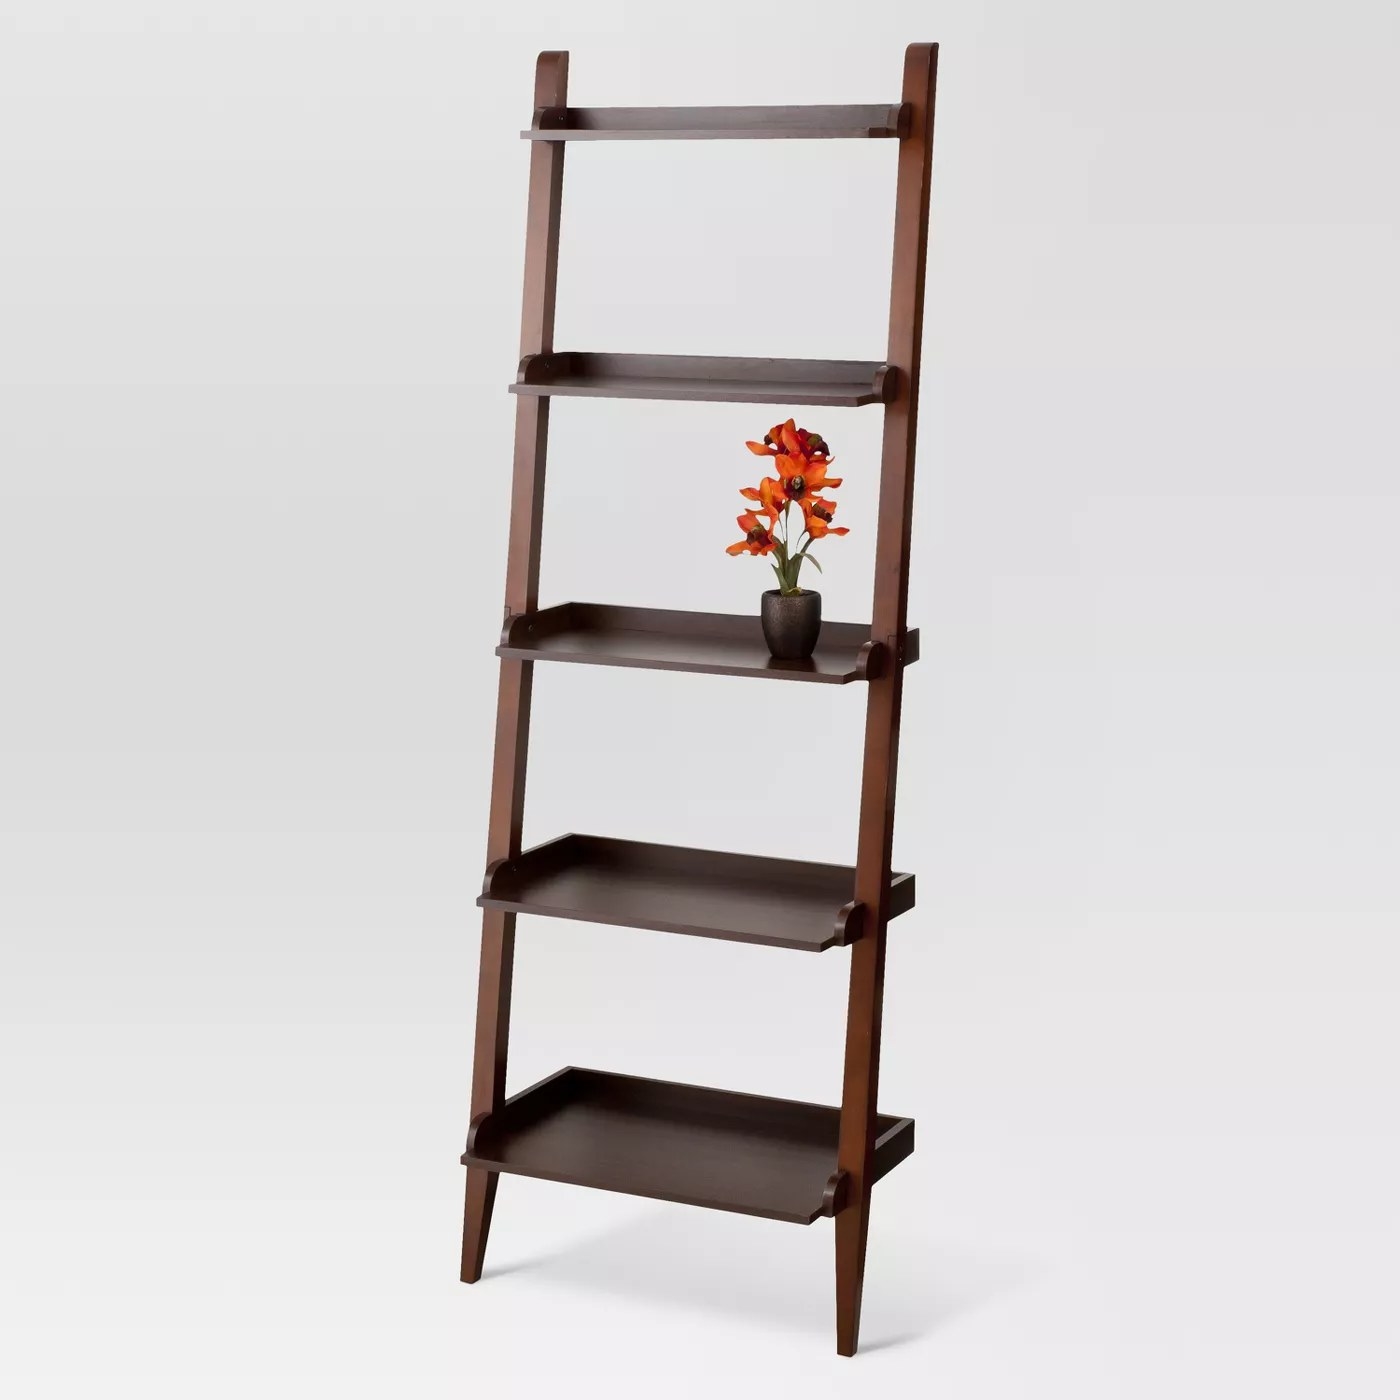 A leaning bookcase